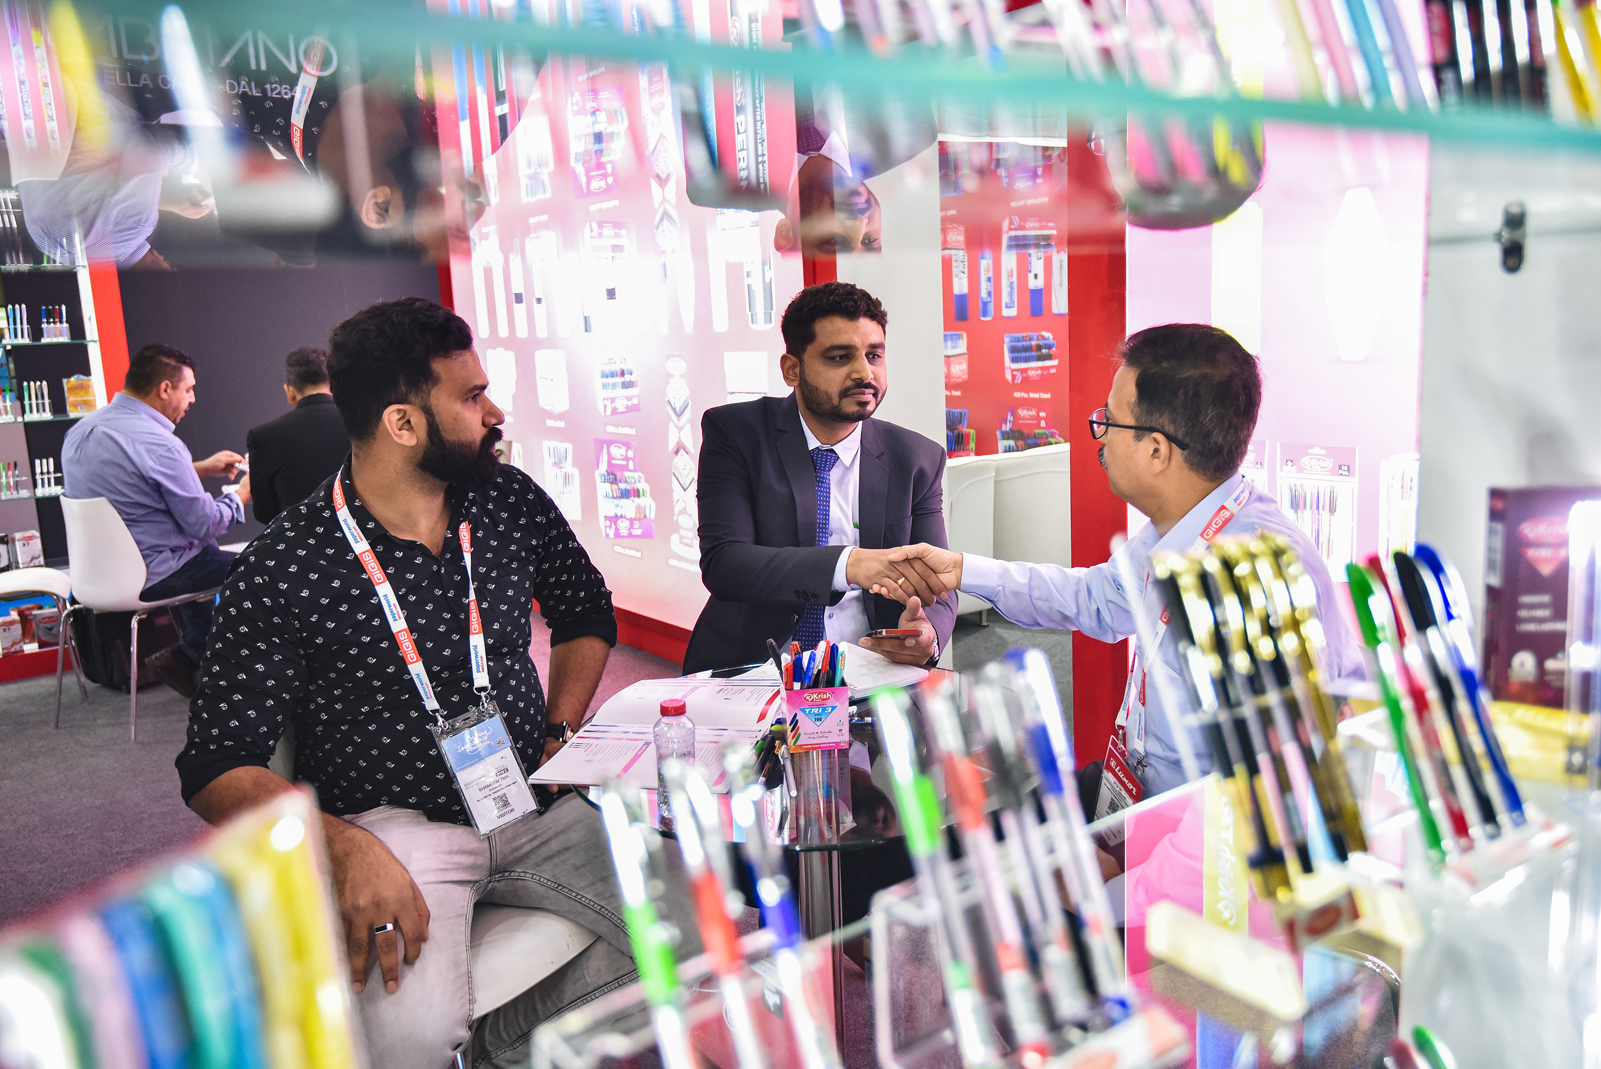 Paperworld Middle East - Visitor & Exhibitor interacting